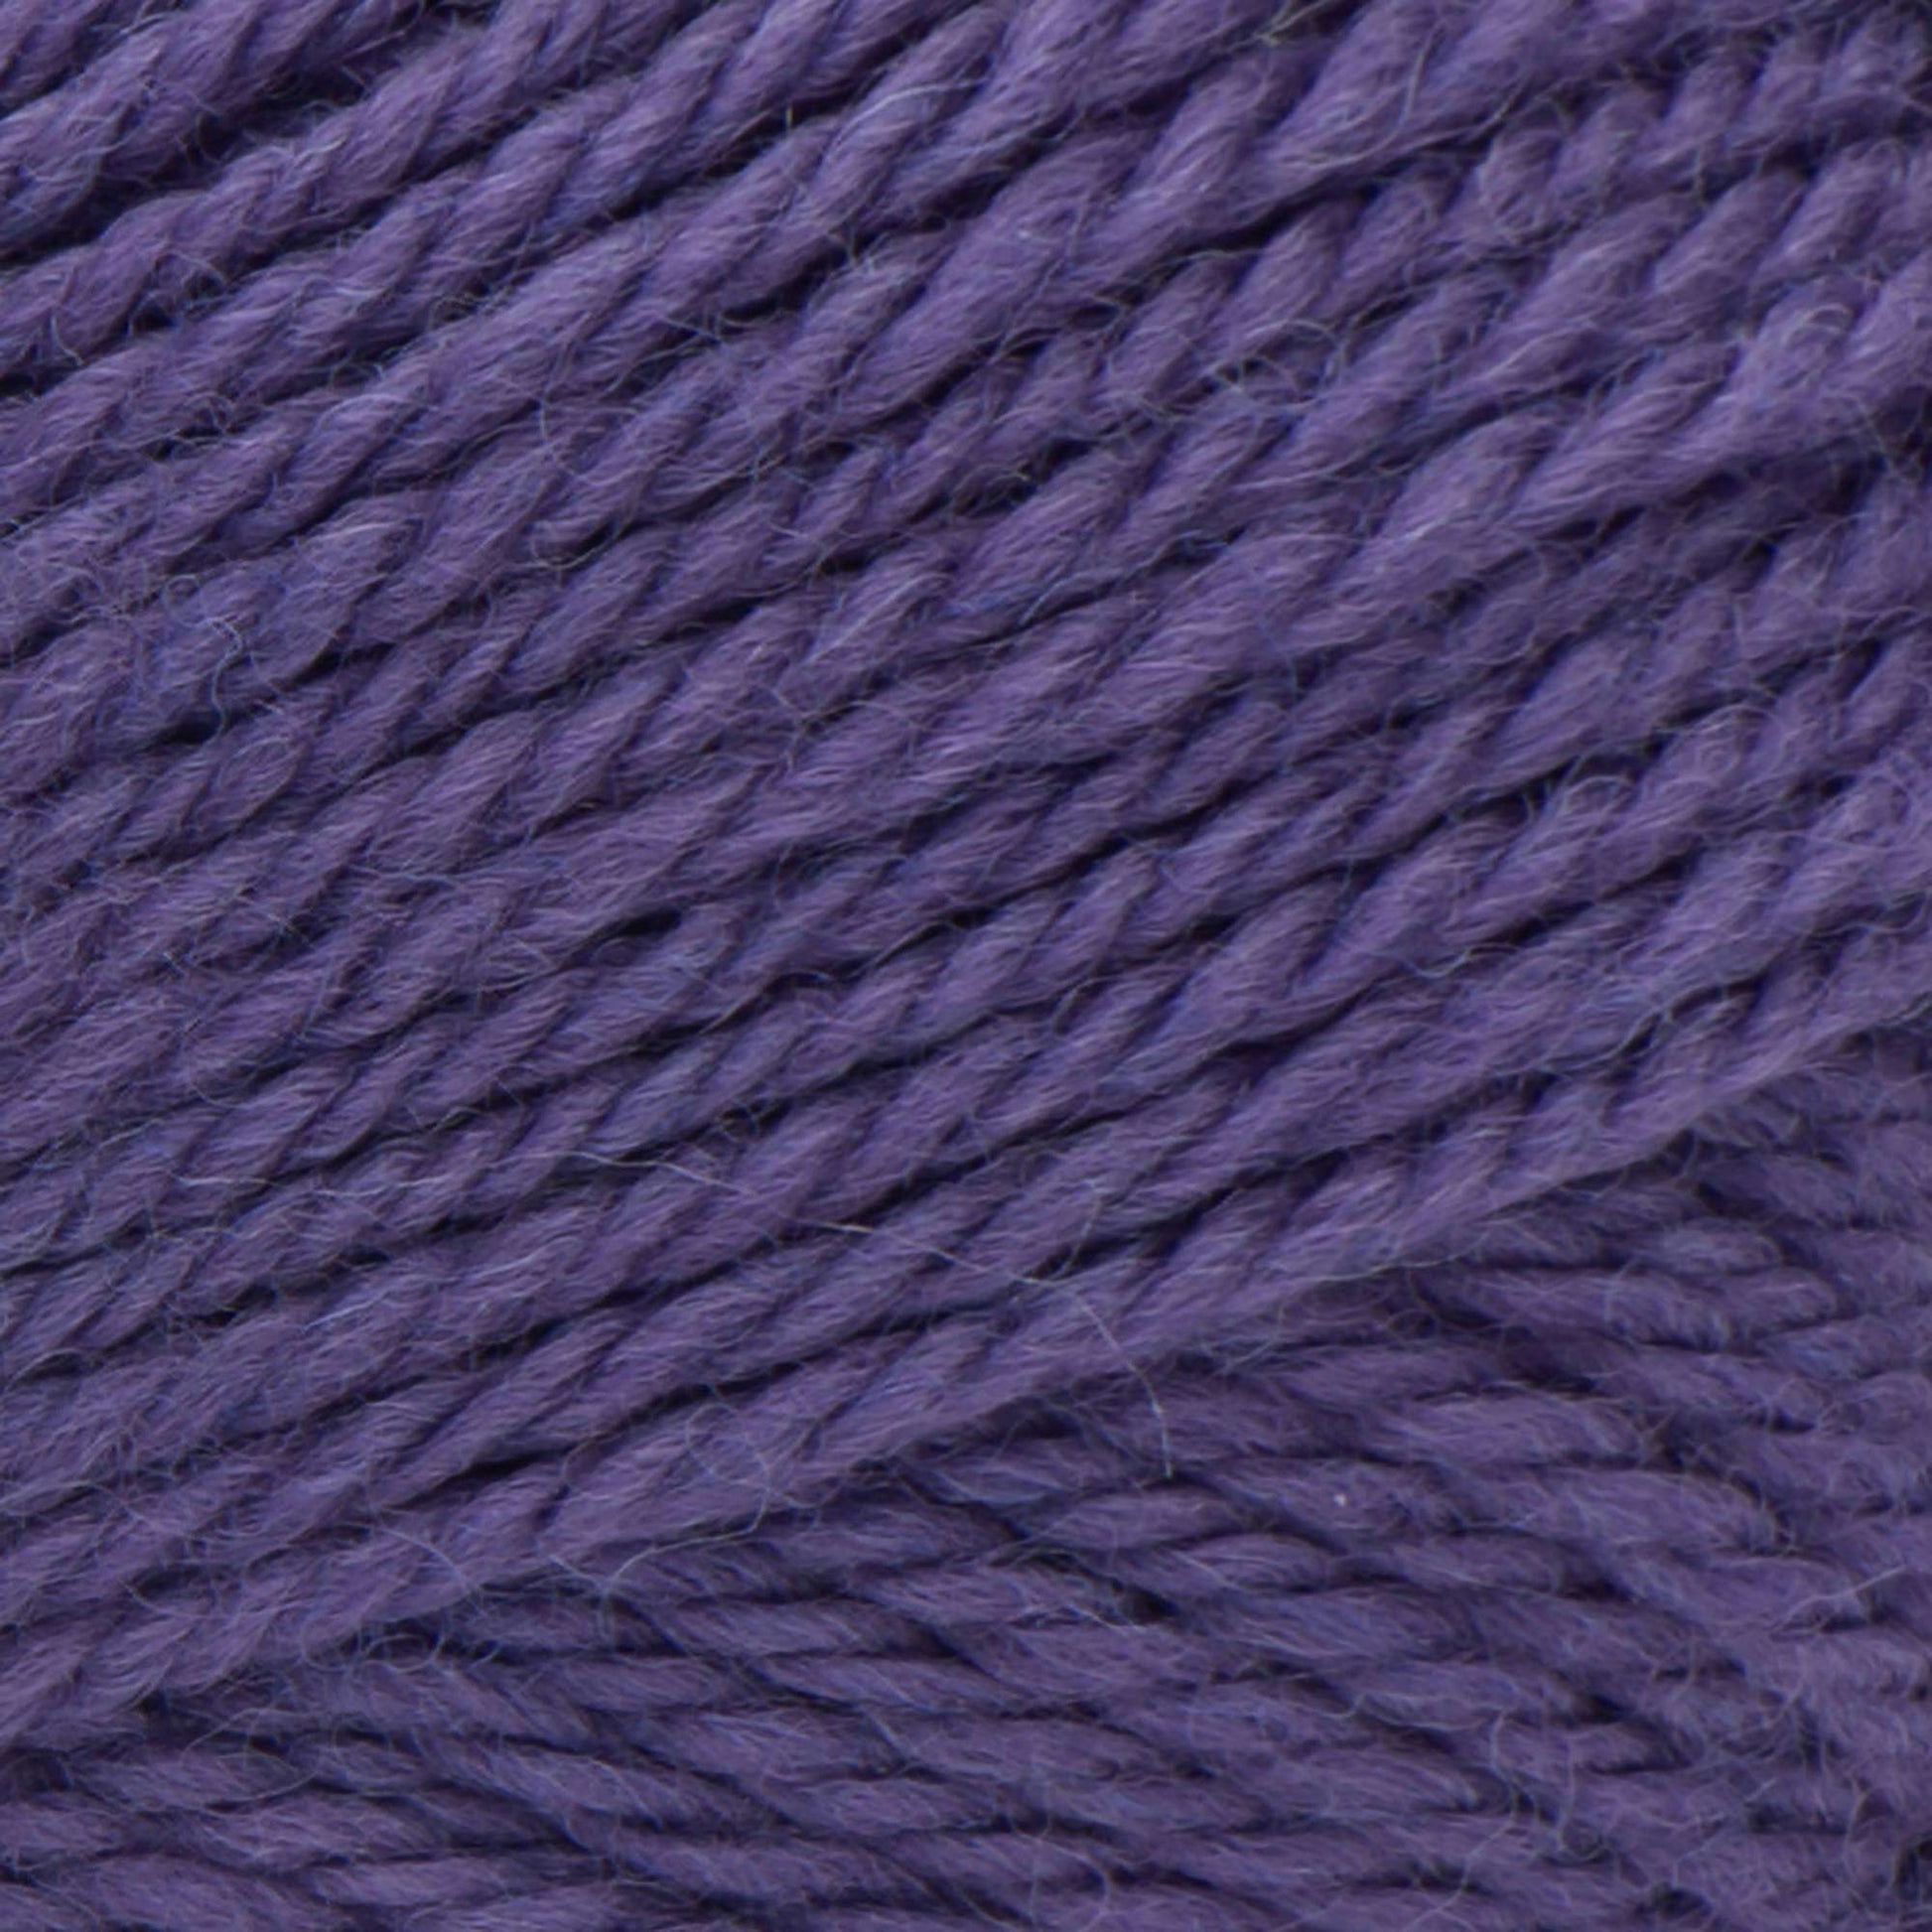 Patons Classic Wool Worsted Yarn Pansy